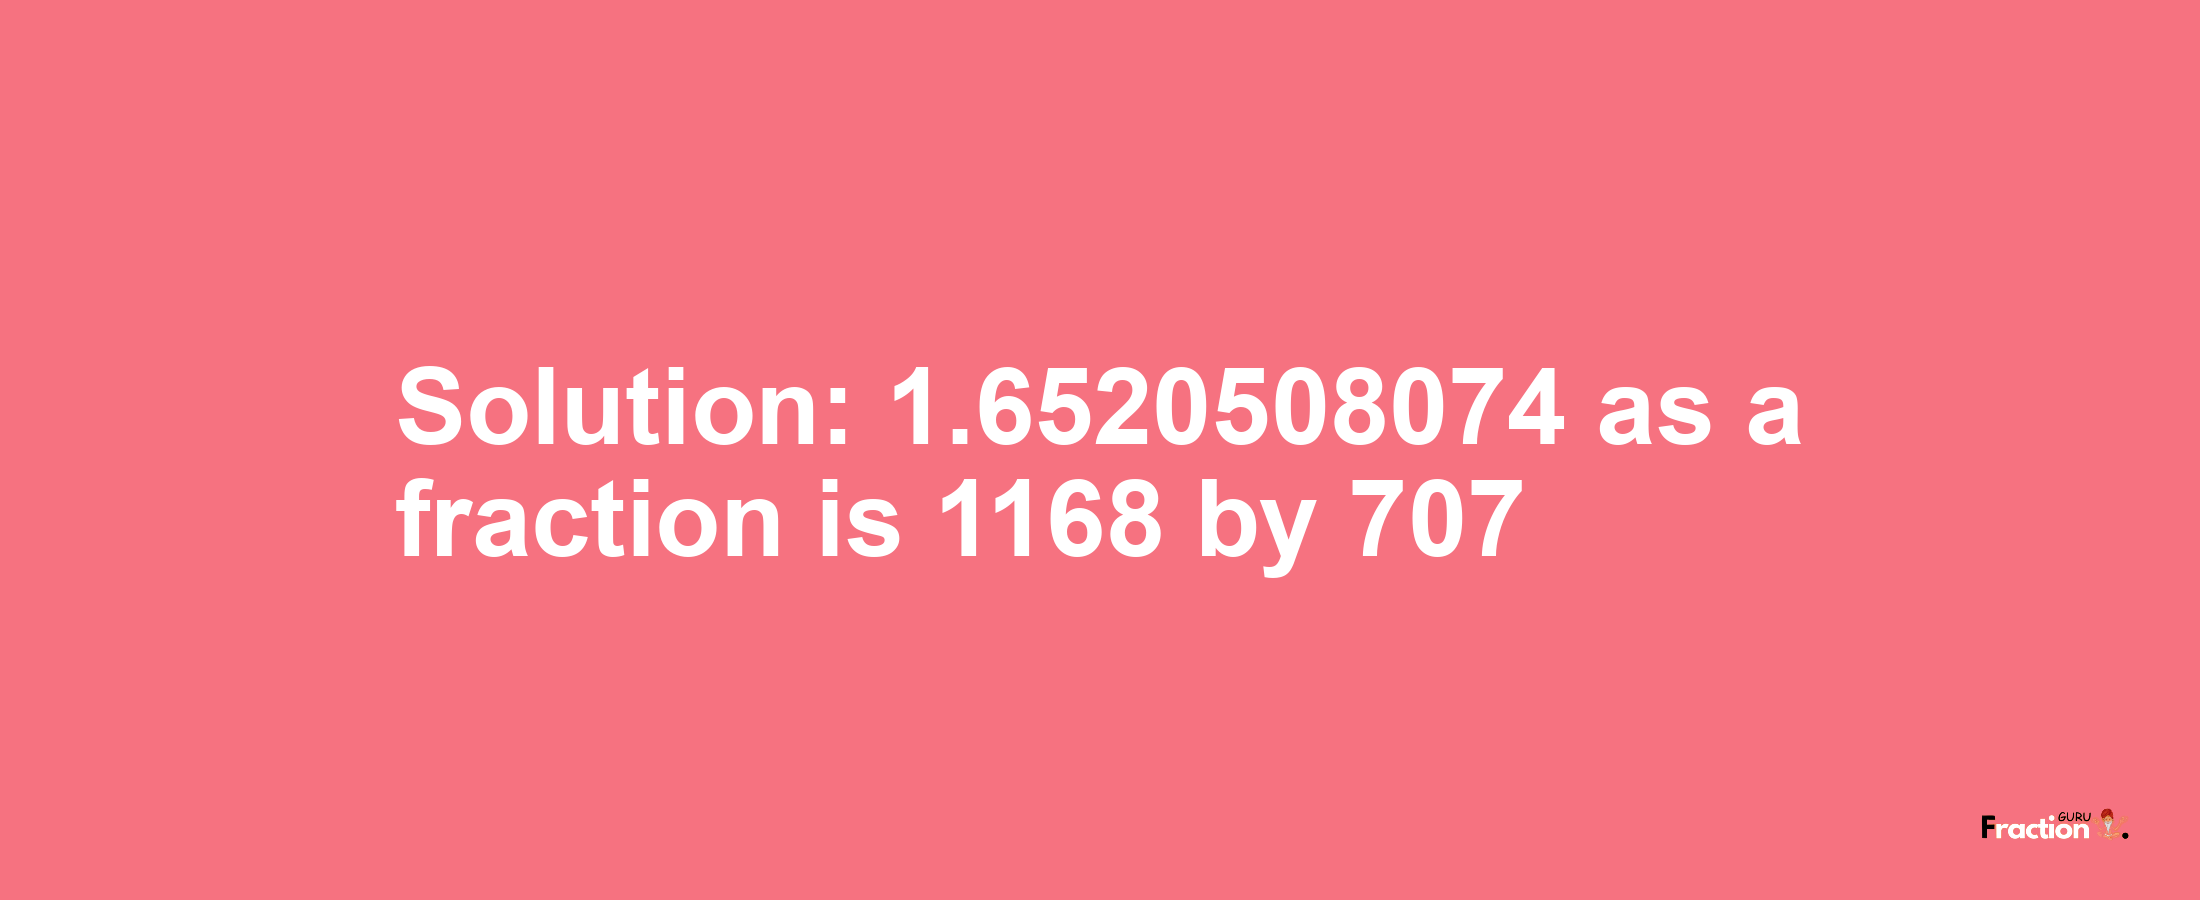 Solution:1.6520508074 as a fraction is 1168/707